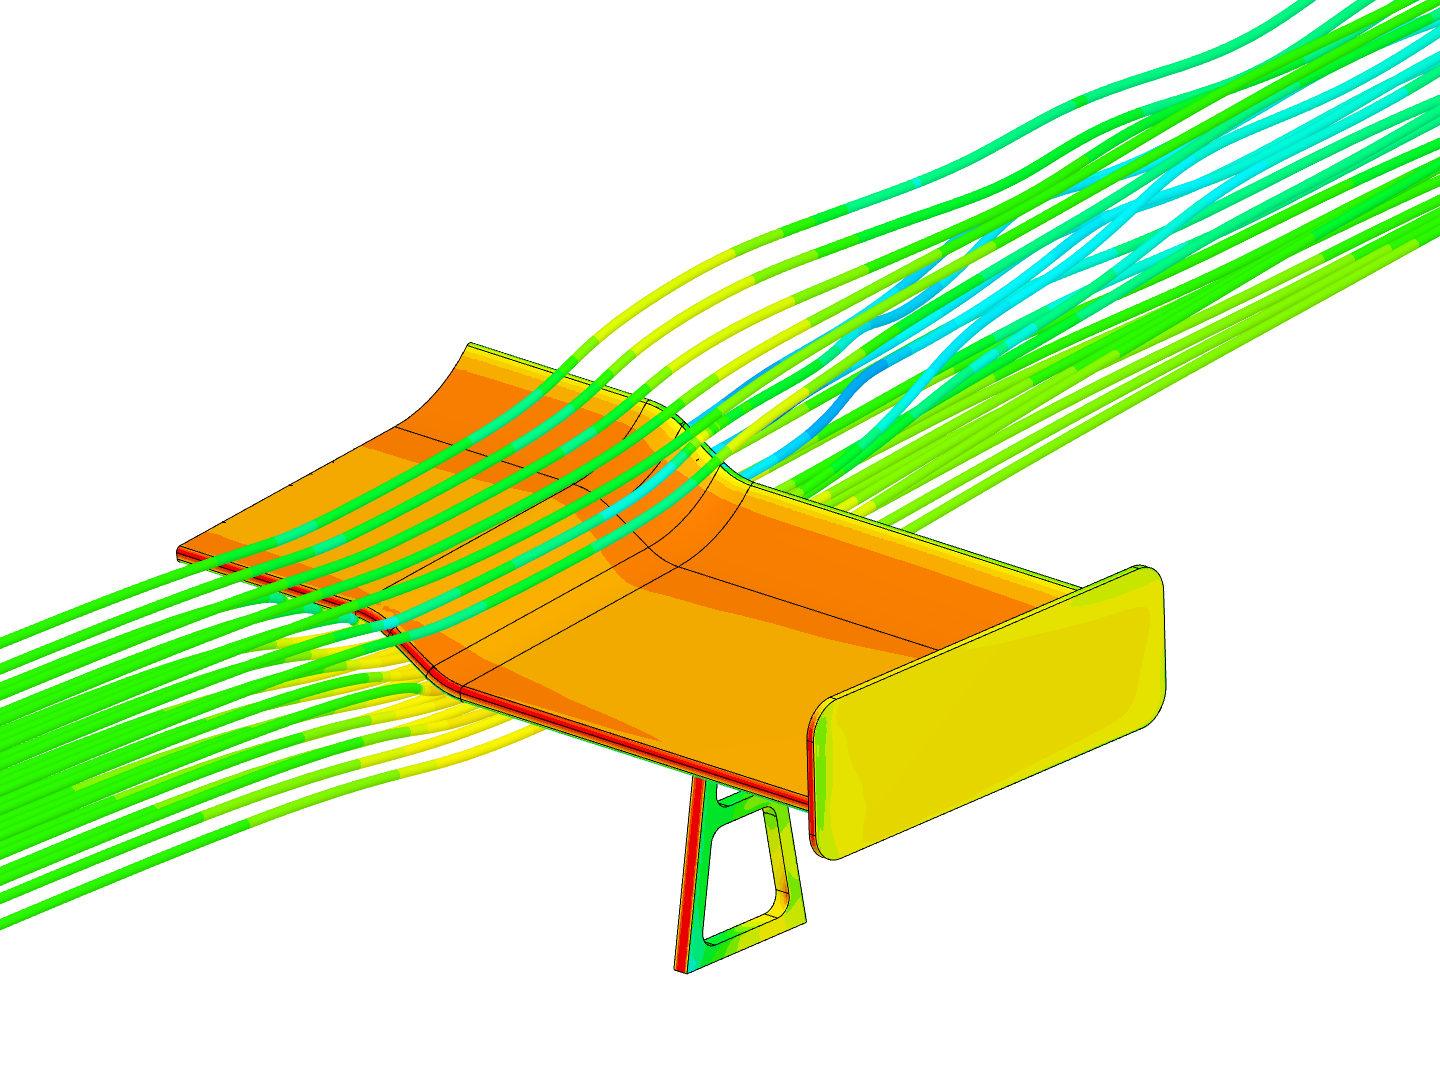 Coursera Airflow project image